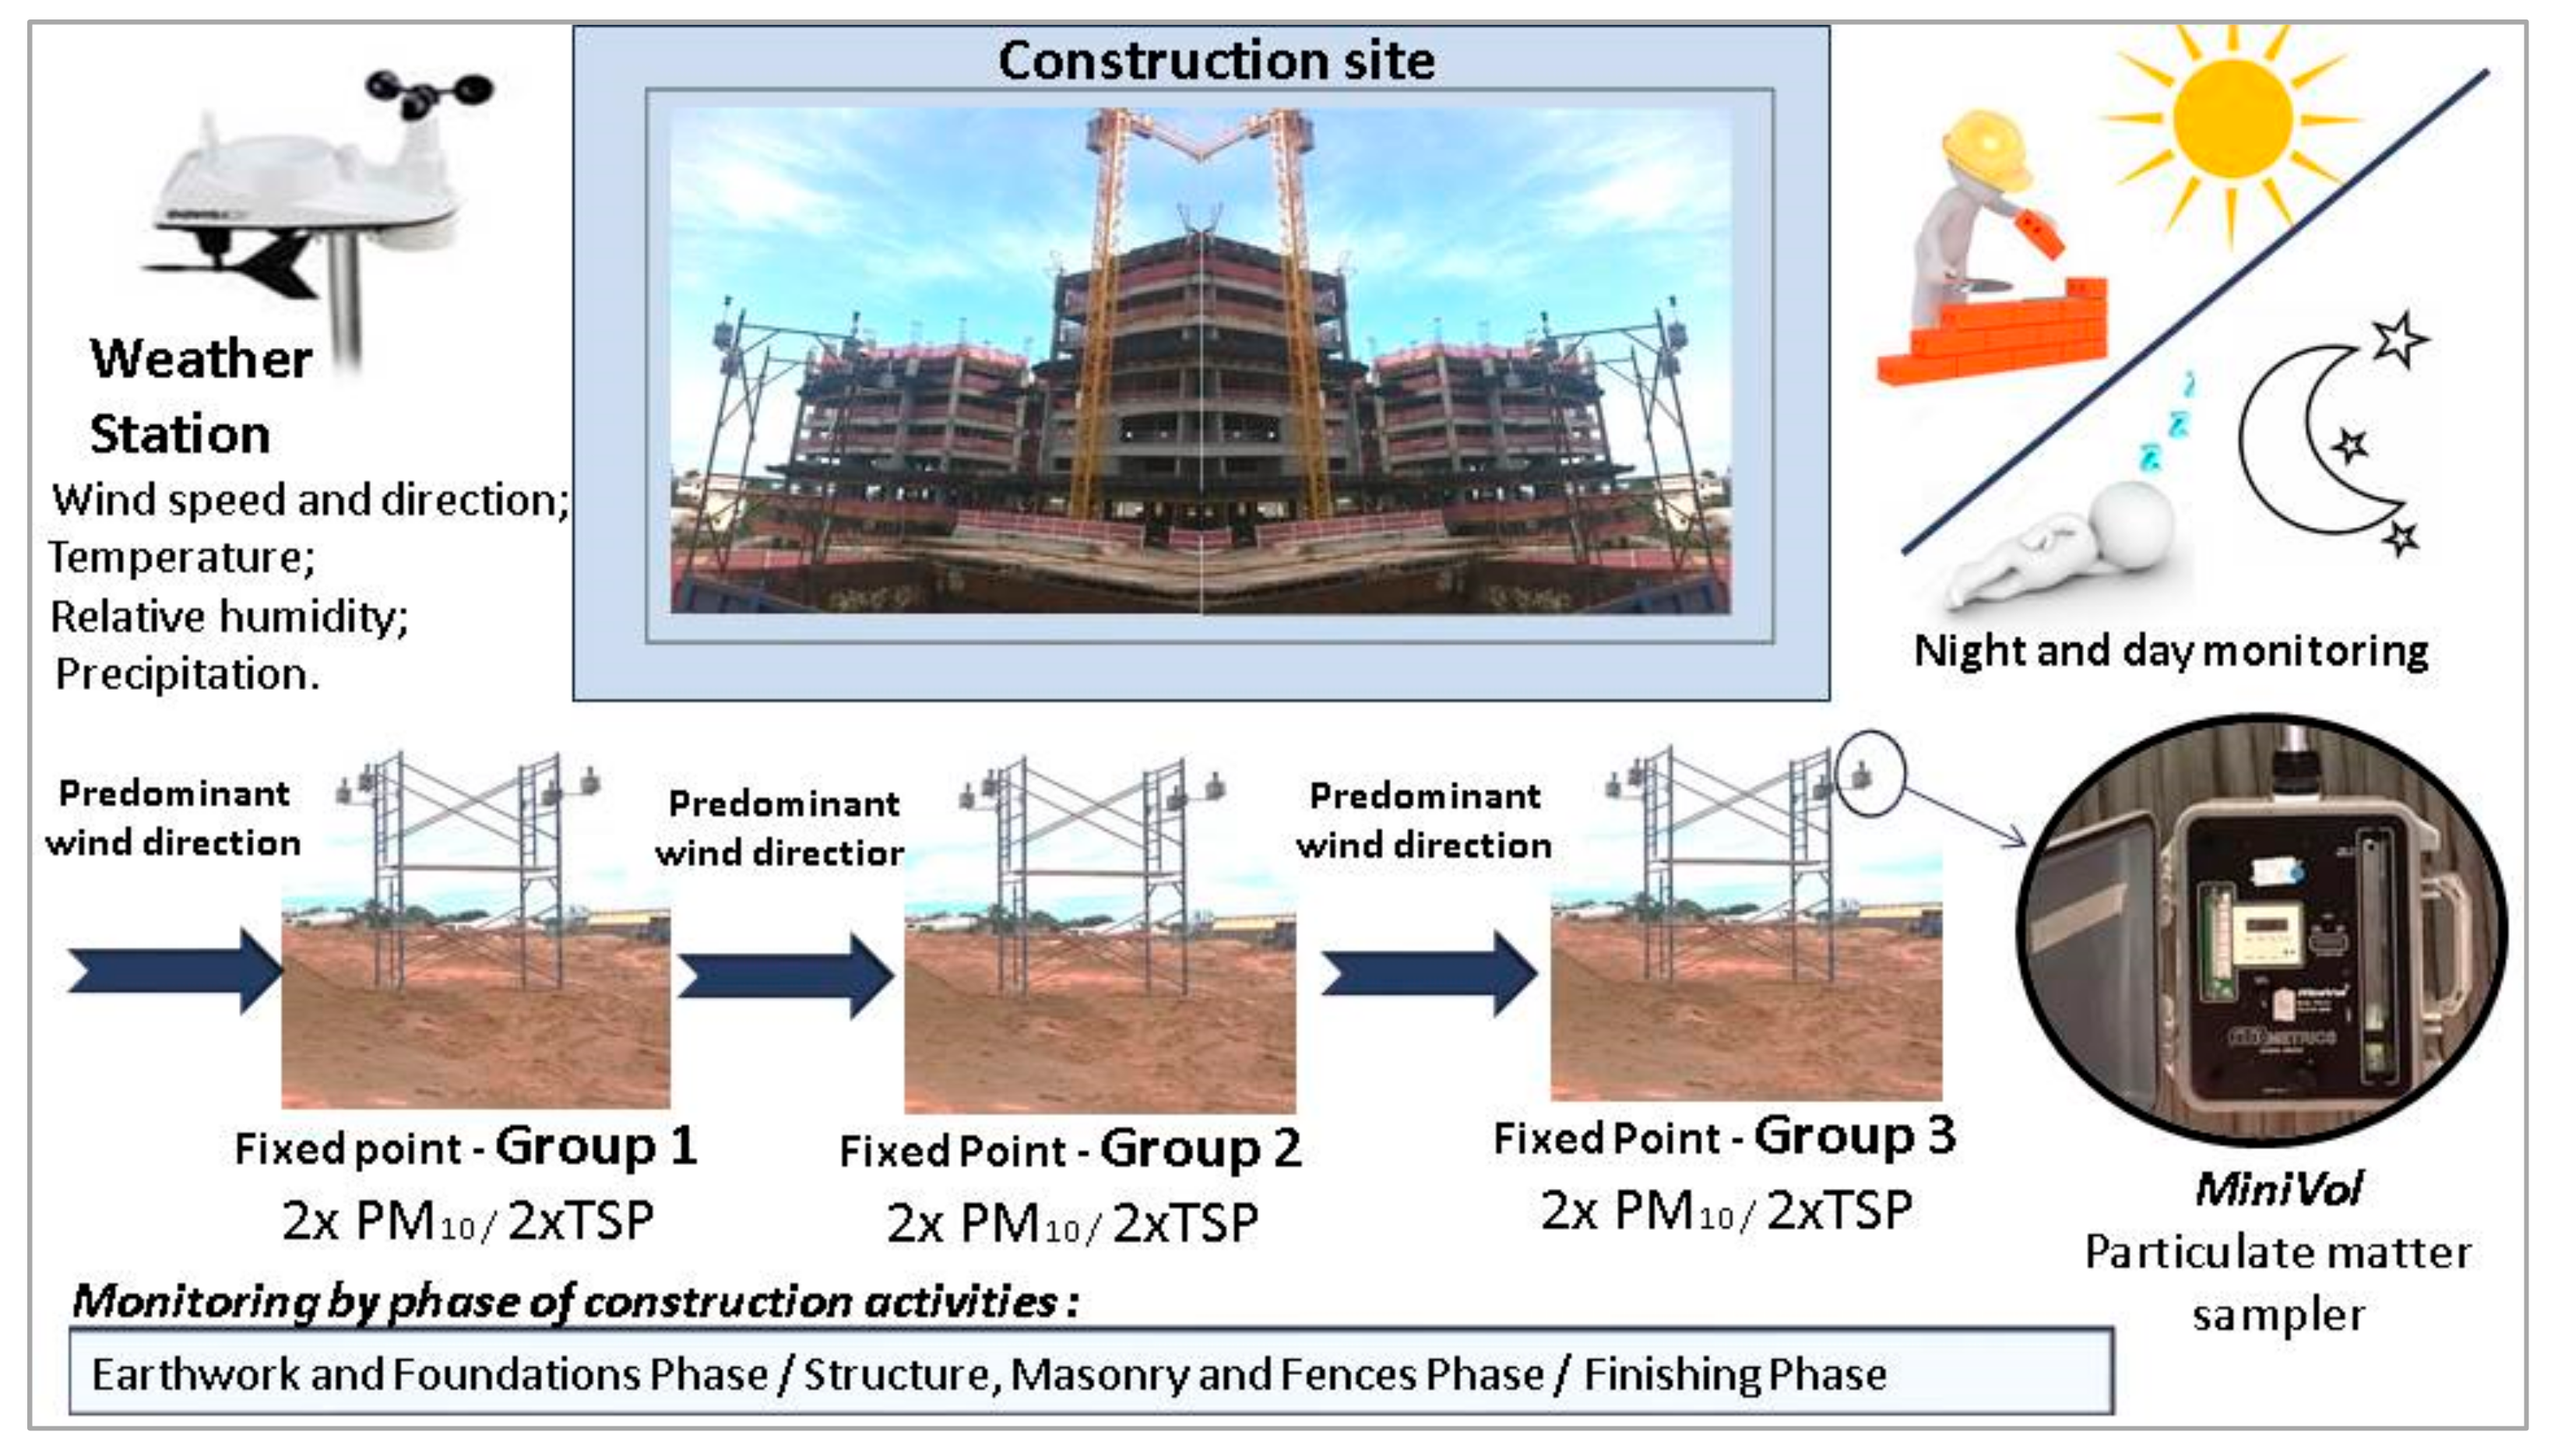 Measurement Accuracy in Construction: Why It Matters